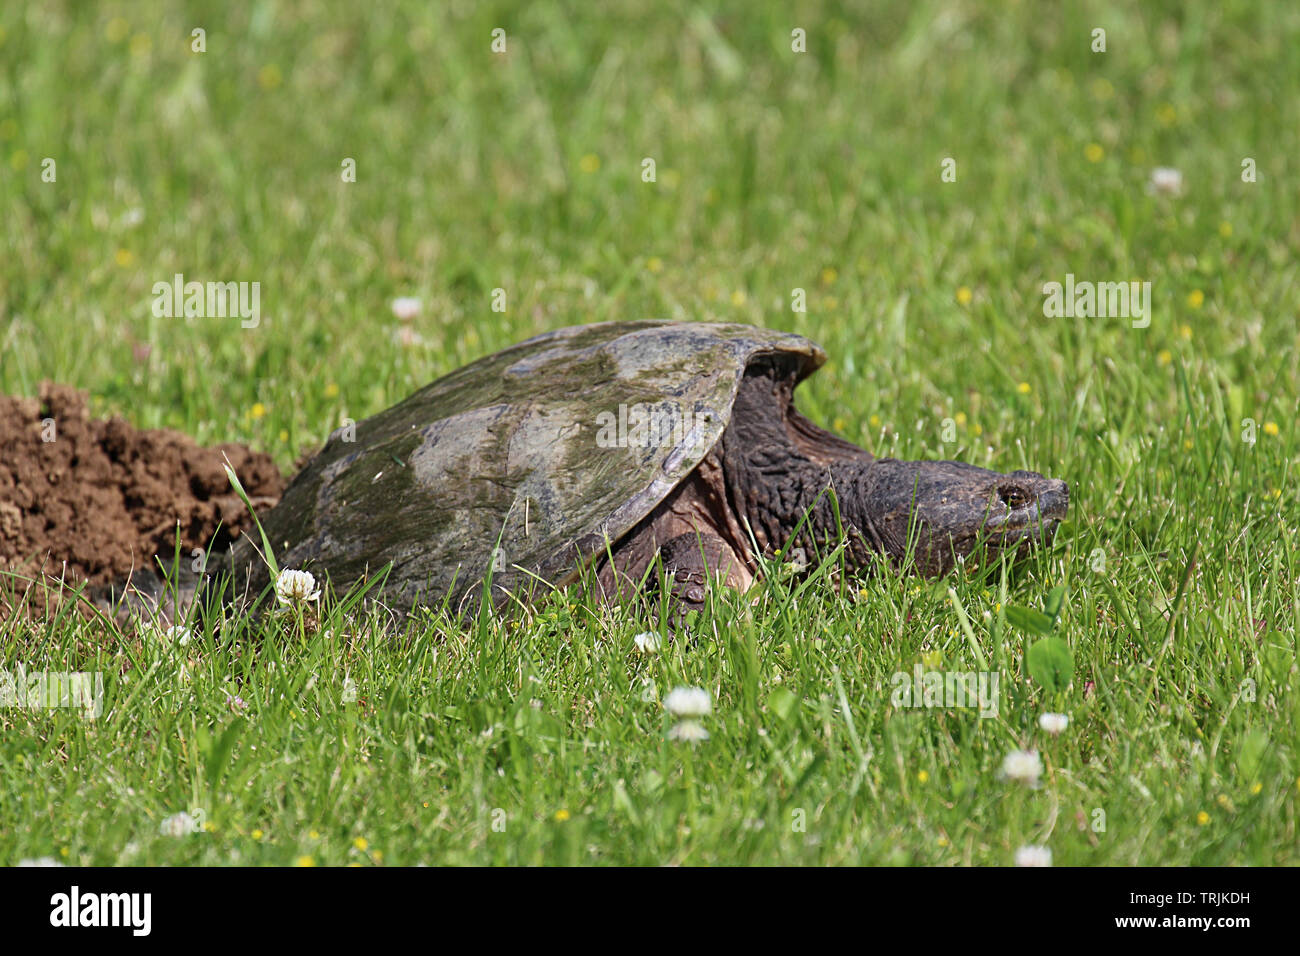 Close up, side view, of a large Common Snapping Turtle laying in the grass in Trevor, Wisconsin, USA, in the spring, laying eggs in a dirt hole Stock Photo